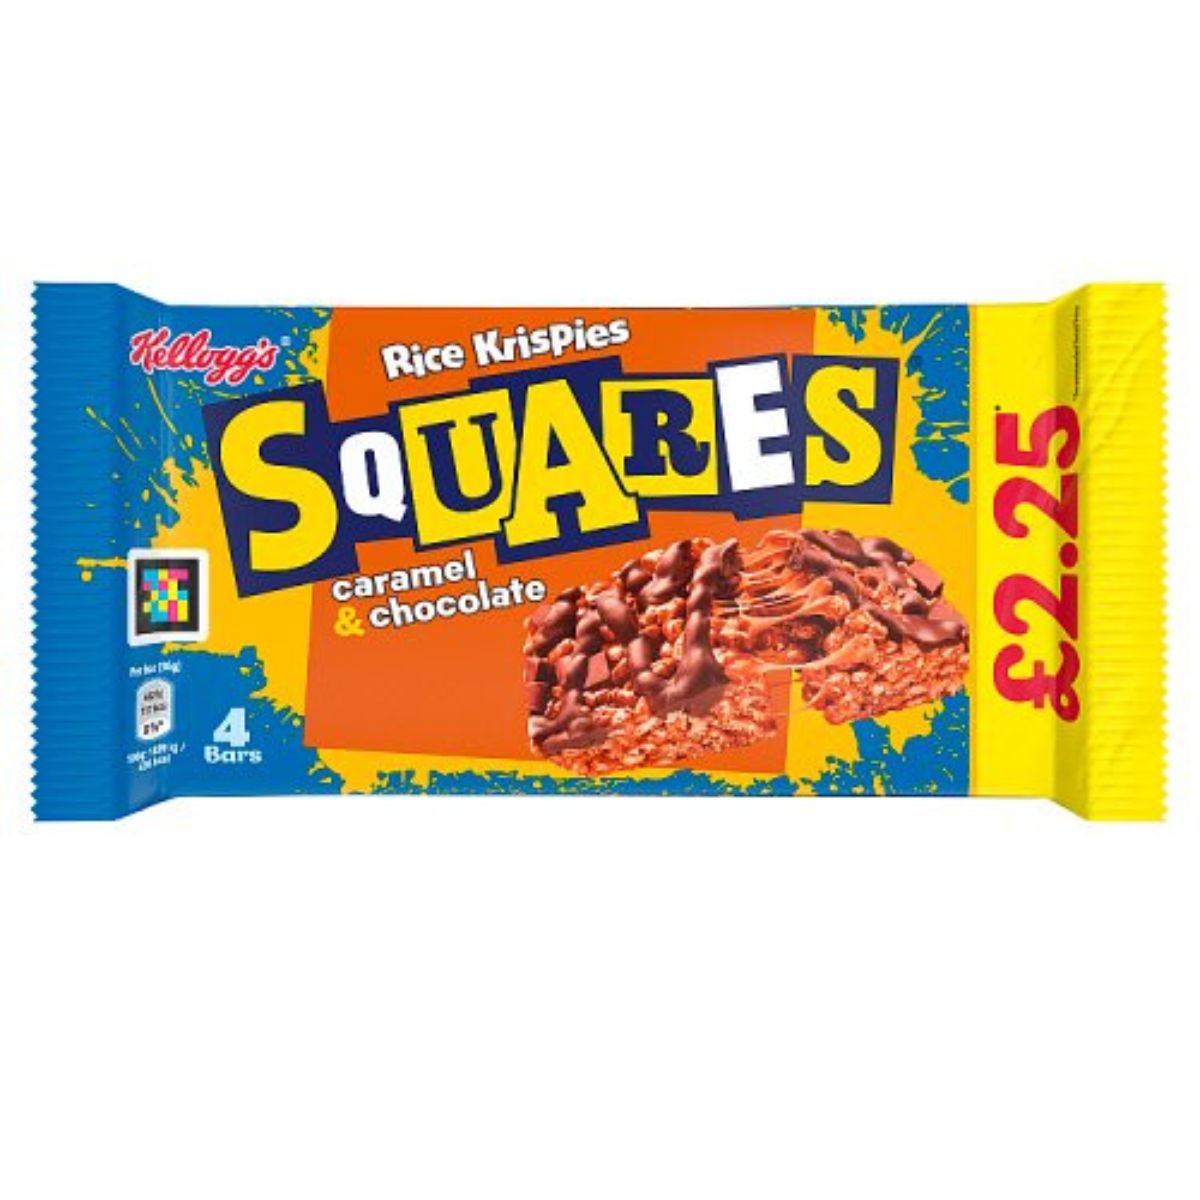 Packaging of Kelloggs - Squares Rice Krispies - 4 x 36g, caramel & chocolate flavor, with a prominent price tag of £2.25.